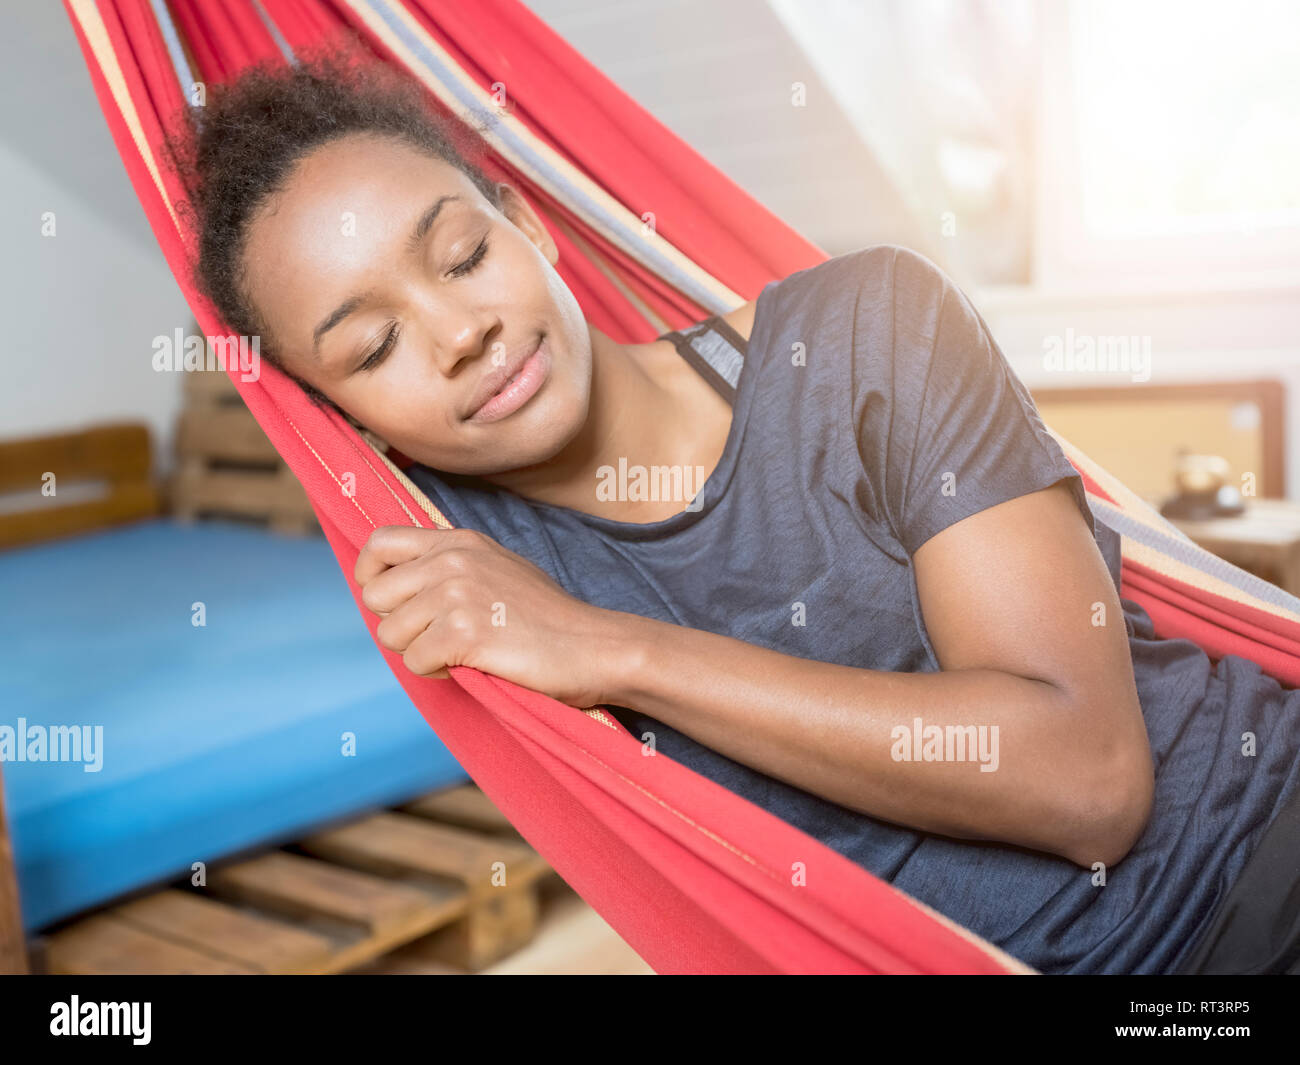 Smiling young woman sleeping in hammock Banque D'Images